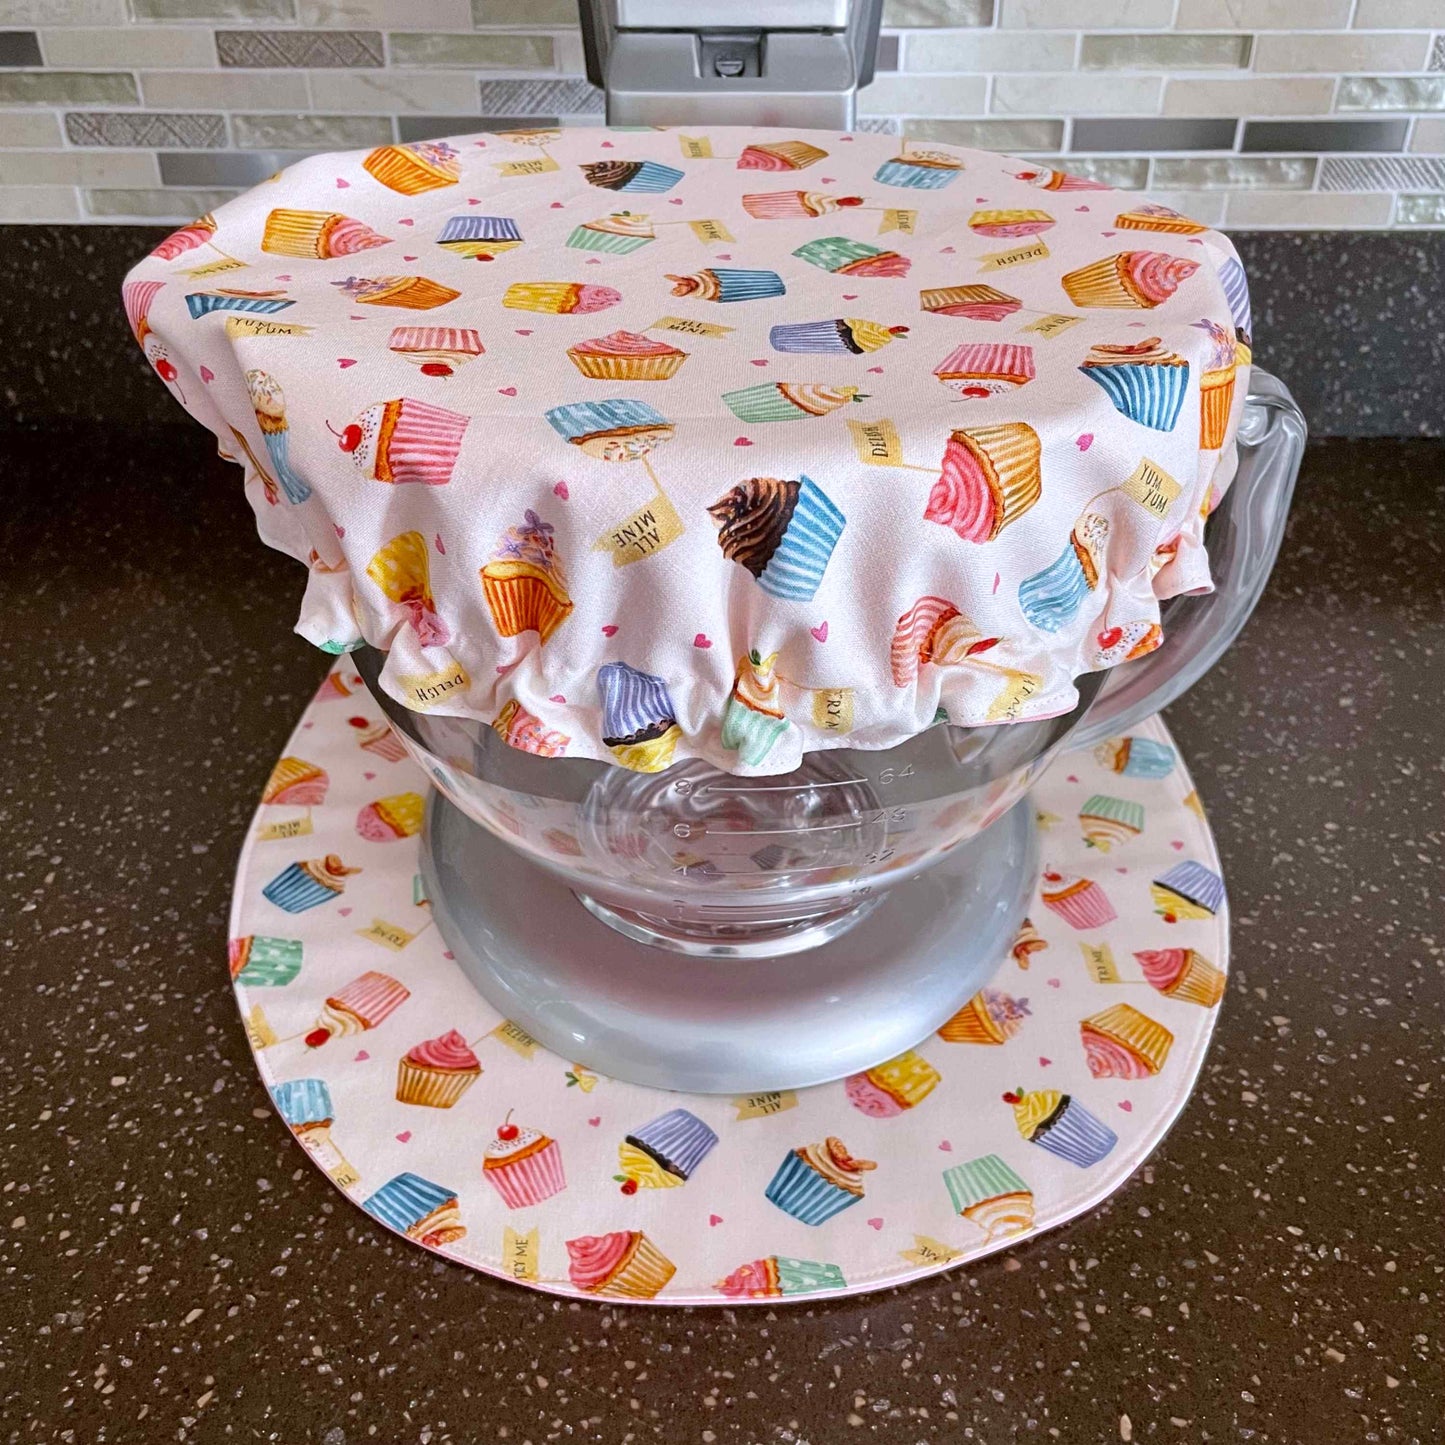 Stand Mixer Bowl Covers - My Little Cupcake